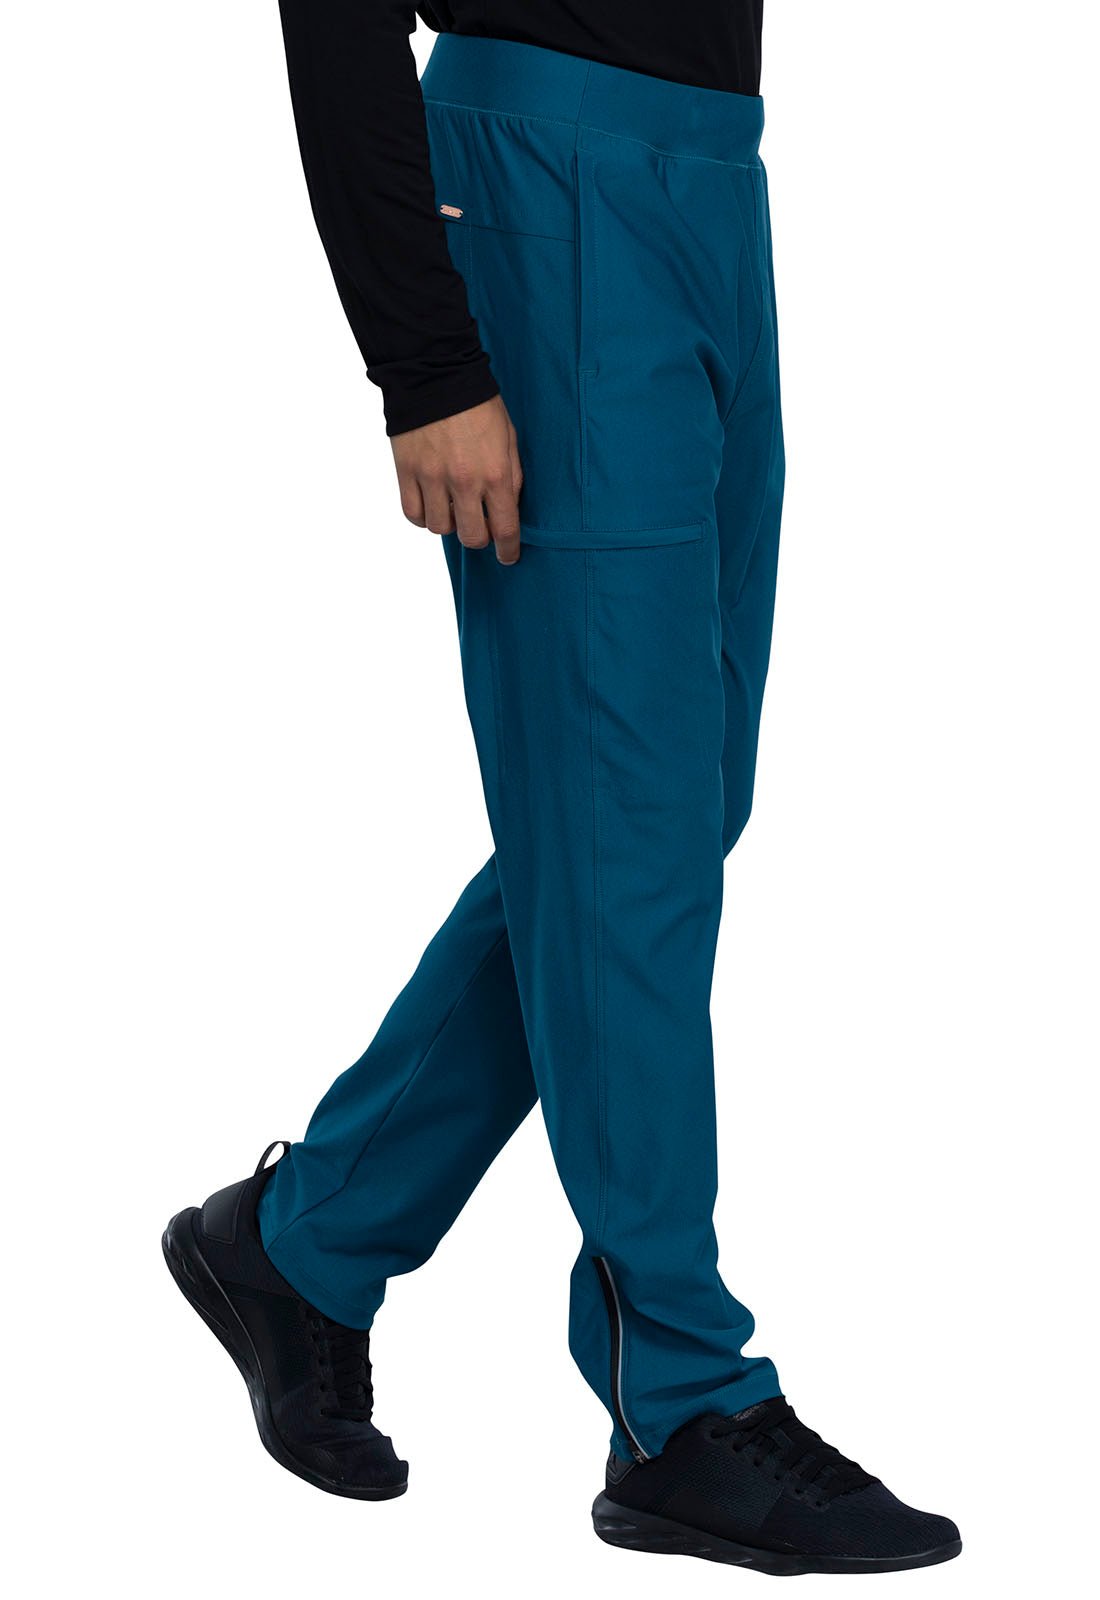 Form by Cherokee Men's Scrubs Tapered Leg Pull-on Pant CK185